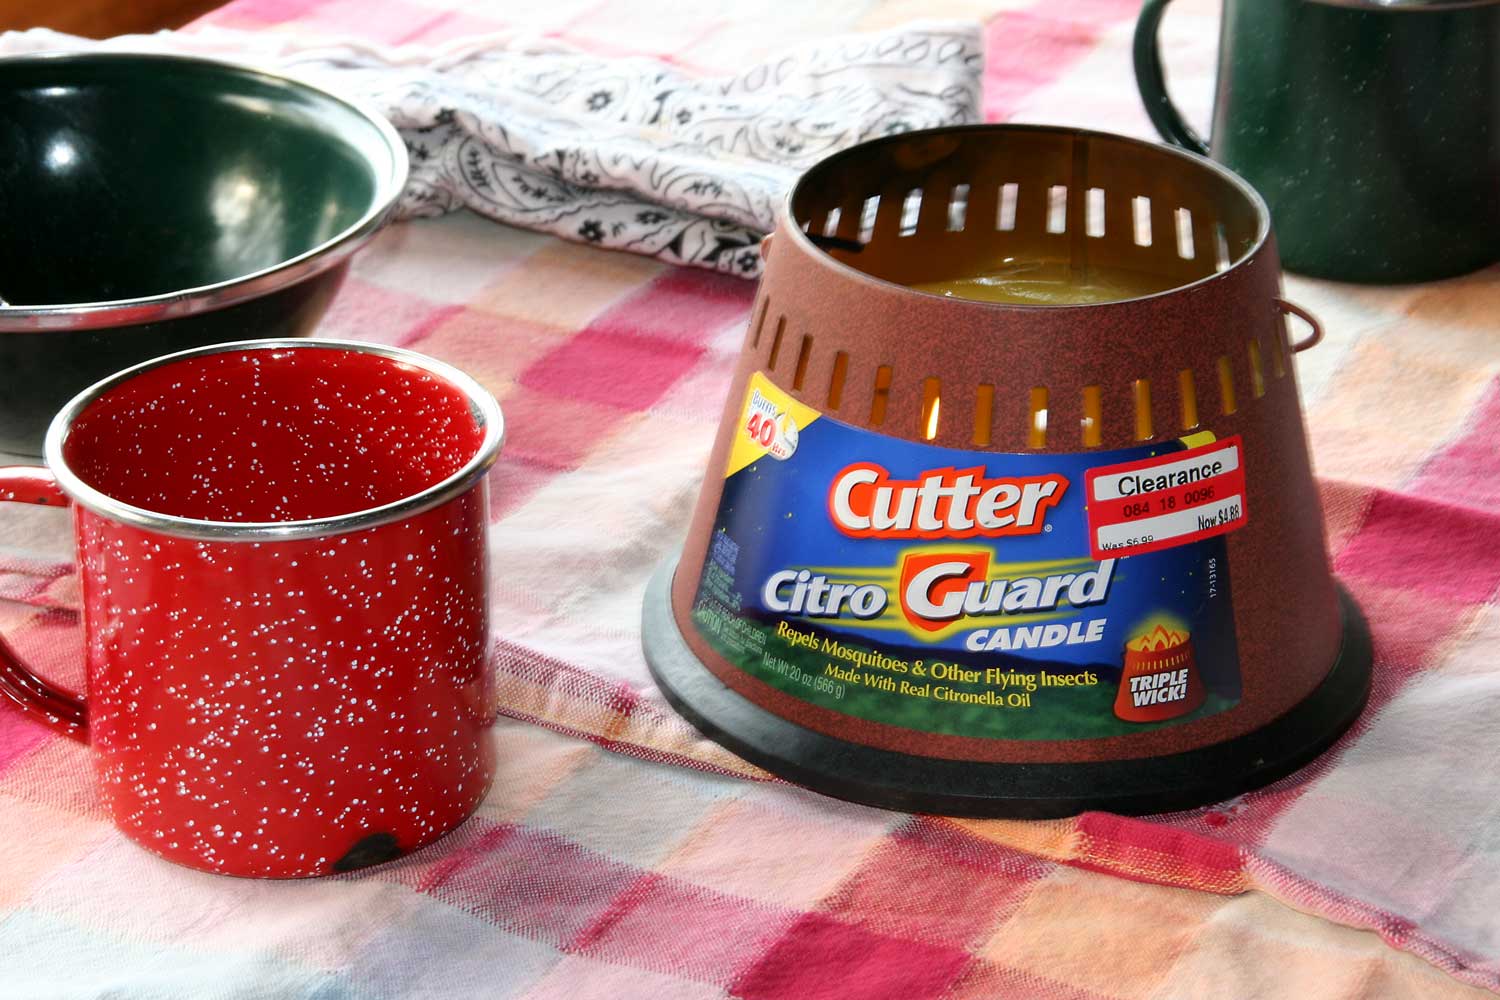 Photograph of a cintronella candle sitting on a gingham table cloth near metal dishware. The candle is in a tapering container with a label on the side that says "Cutter Citro Guard Candle, Repels mosquitoes & other flying insects made with real citronella oil."